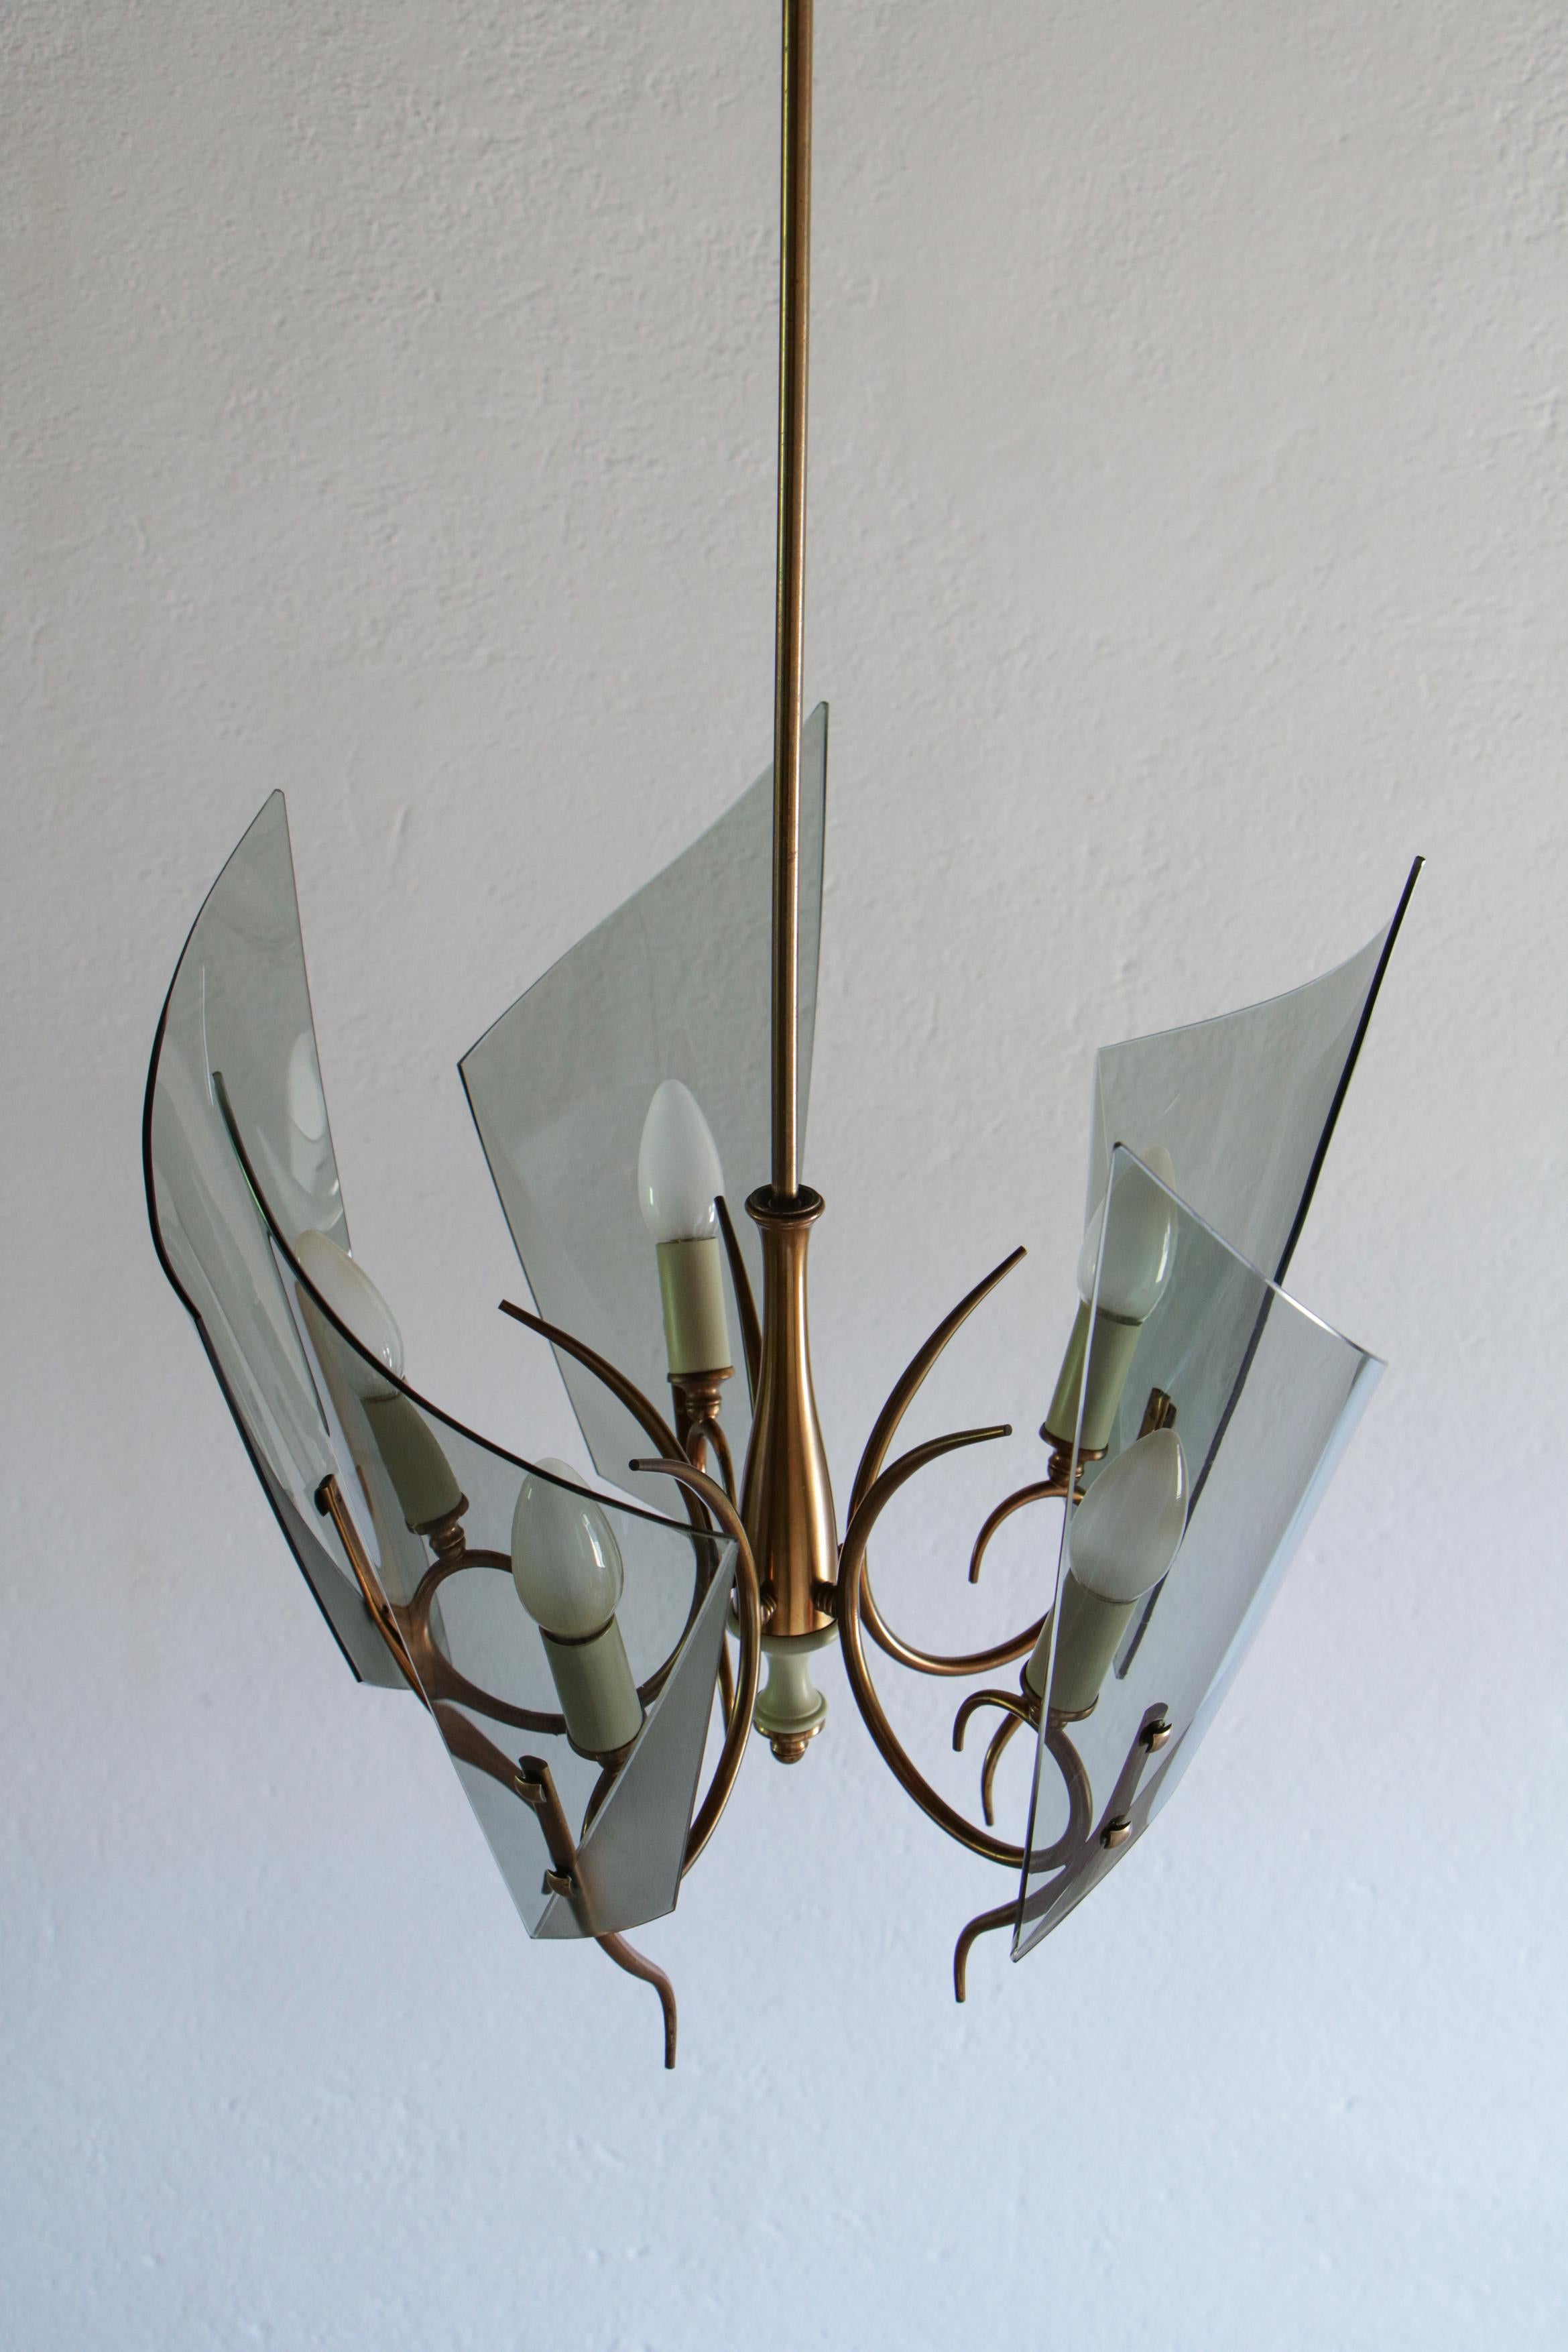 Italian Mid-Century Curved Glass Chandelier Attributed to Fontana Arte, 1950s In Good Condition For Sale In Traversetolo, IT